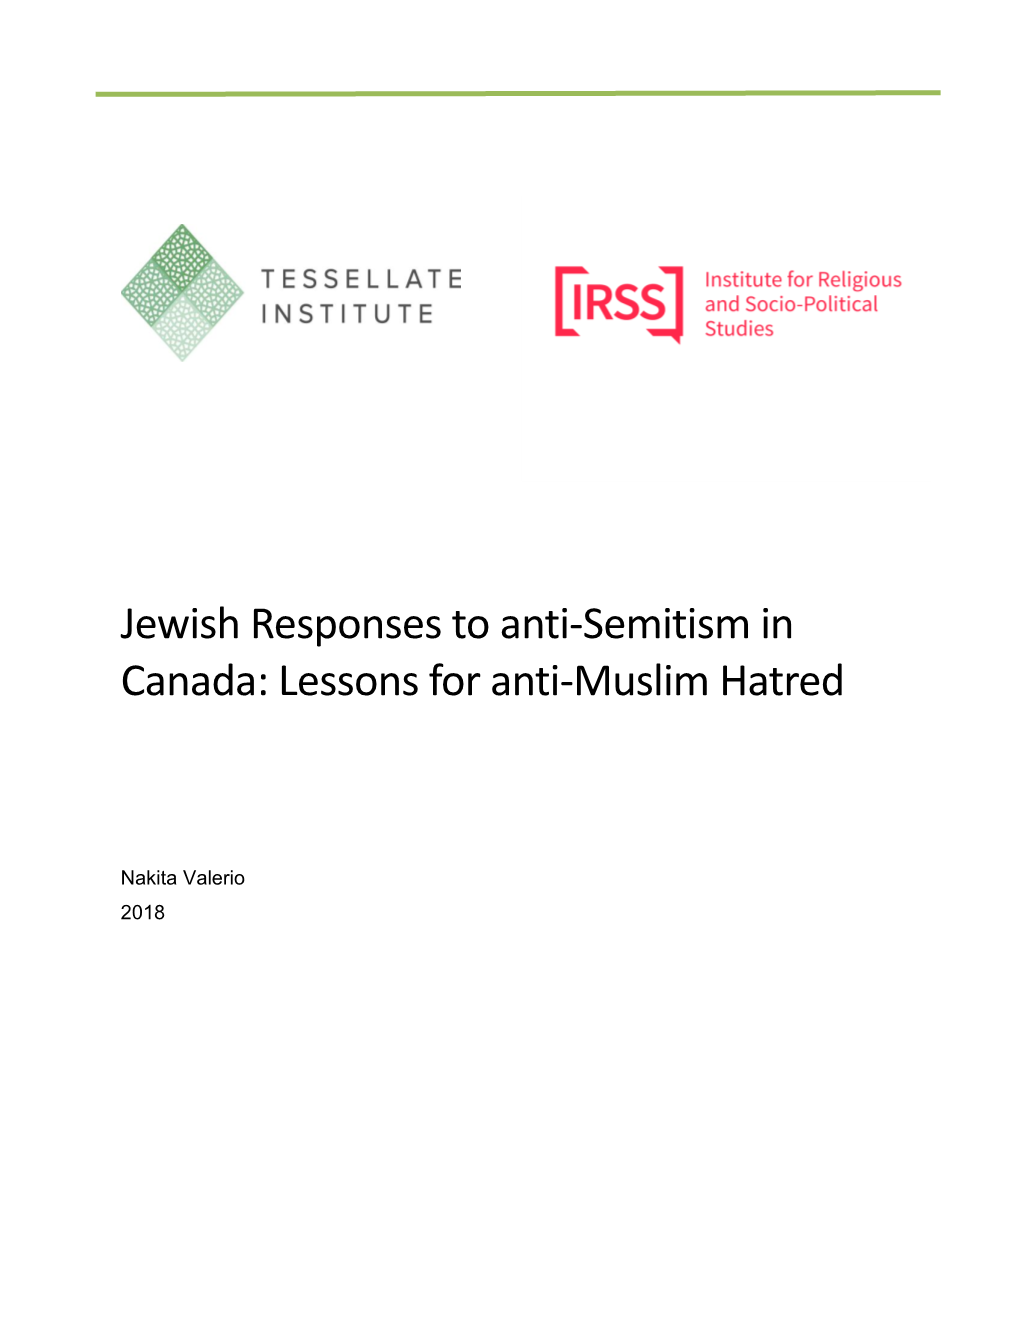 Jewish Responses to Anti-Semitism in Canada: Lessons for Anti-Muslim Hatred